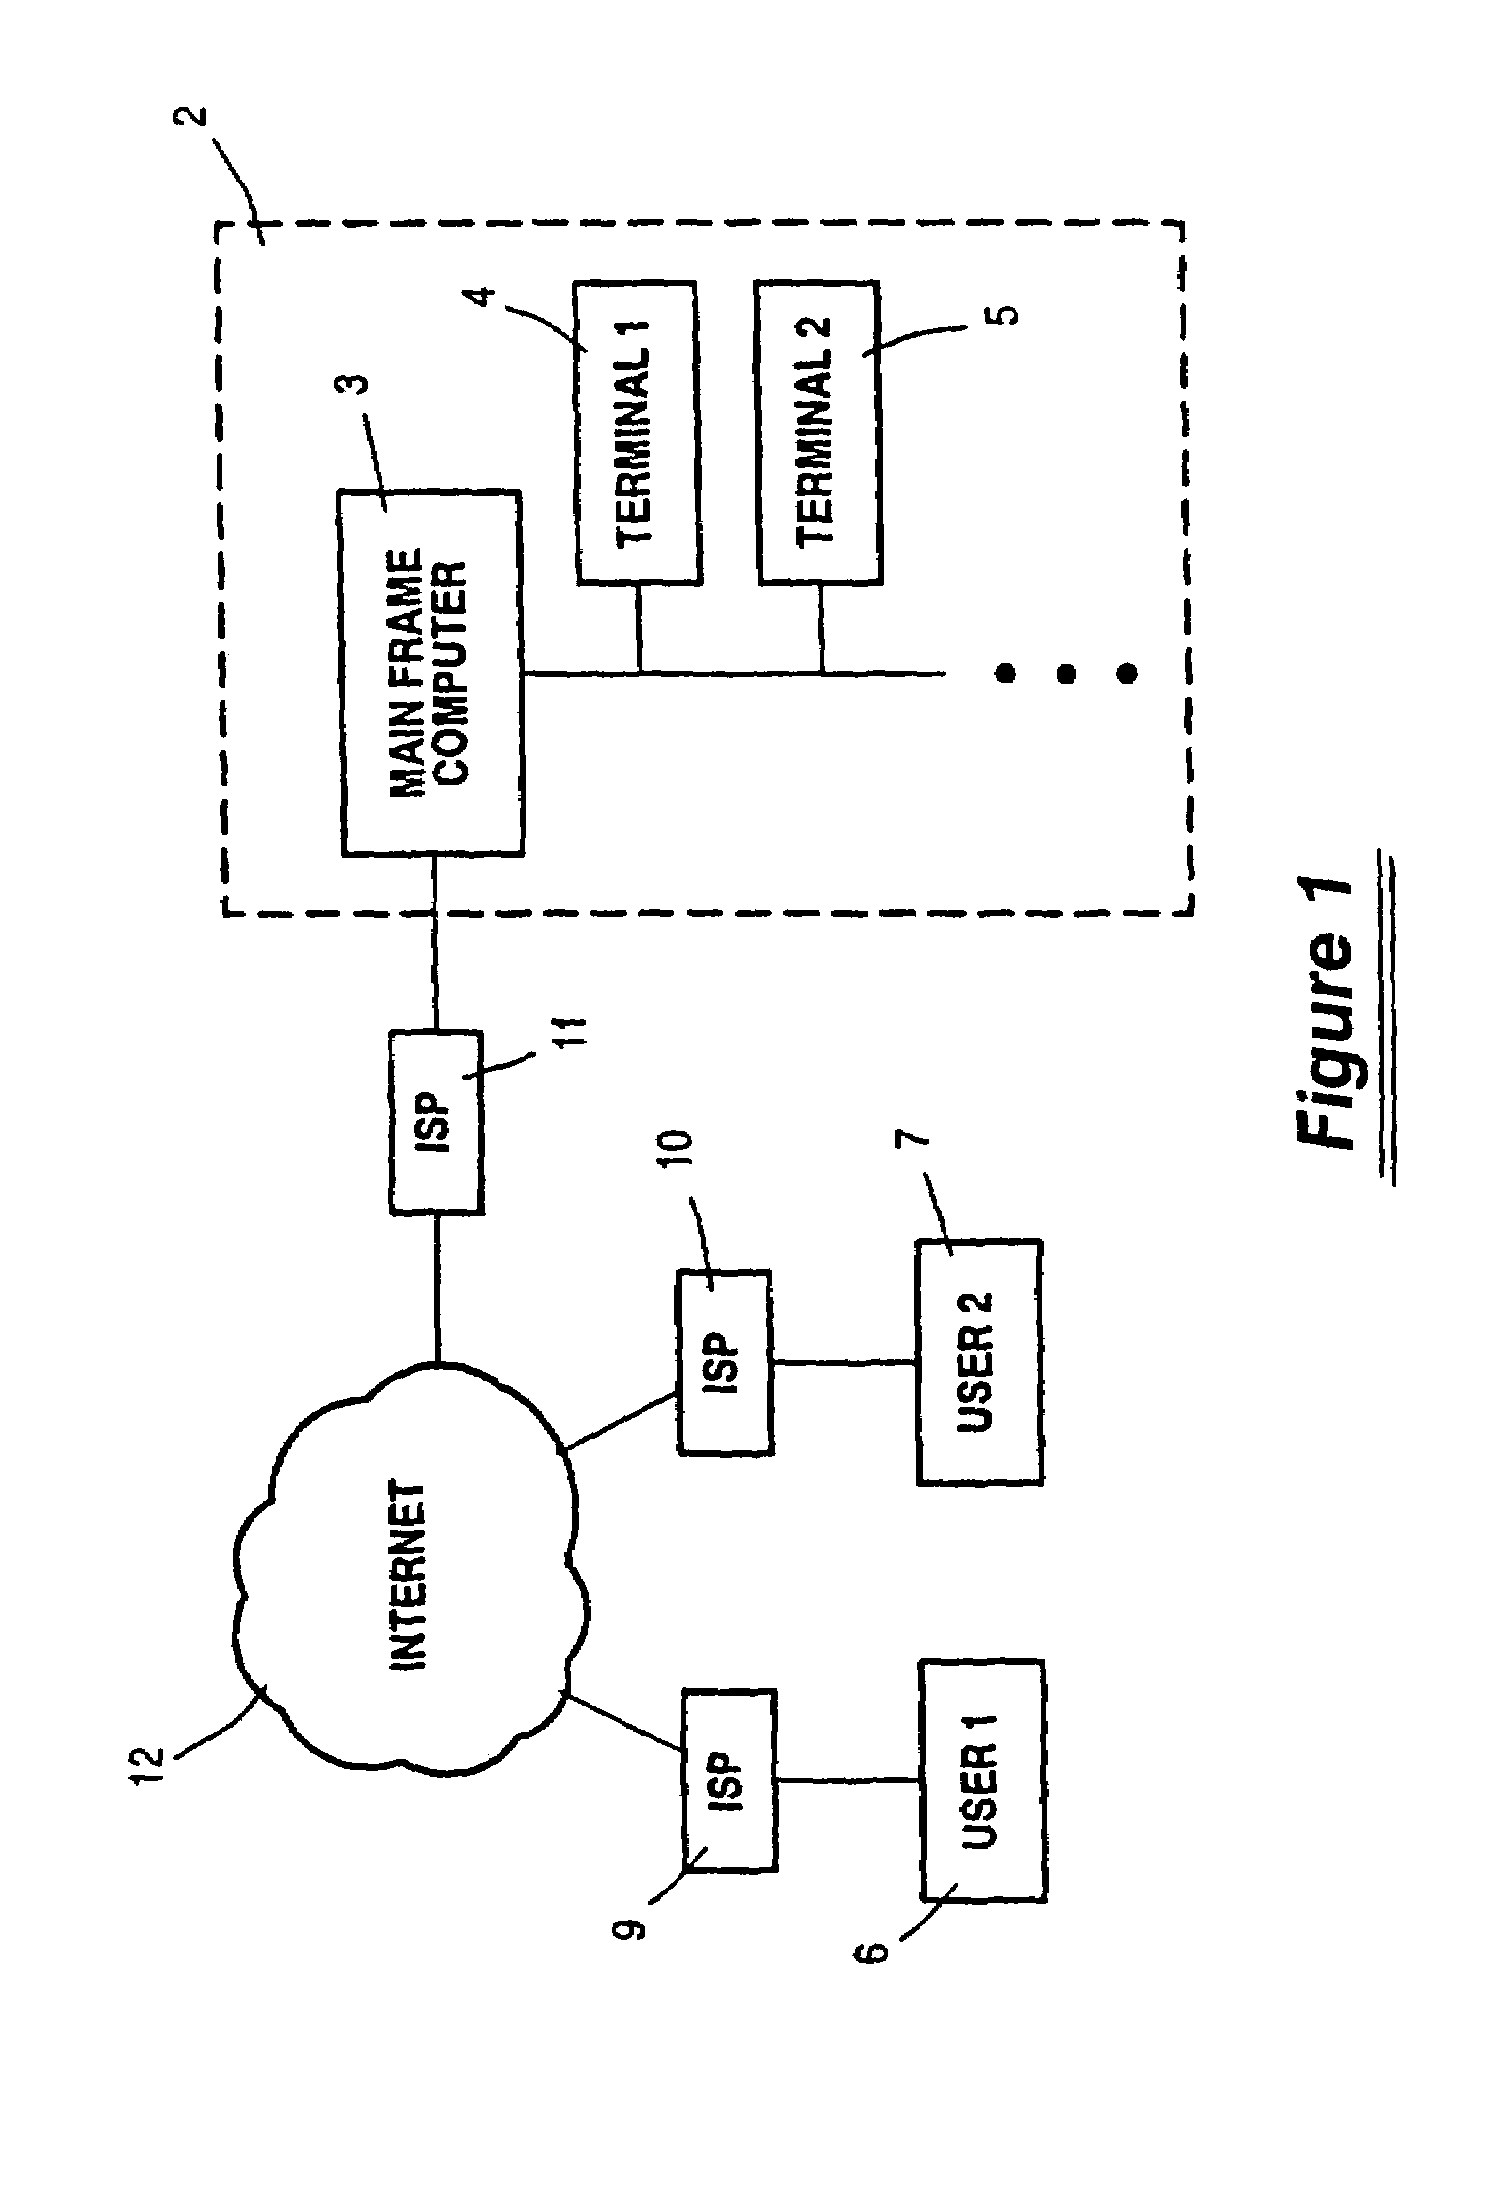 Automated web interface generation for software coded applications